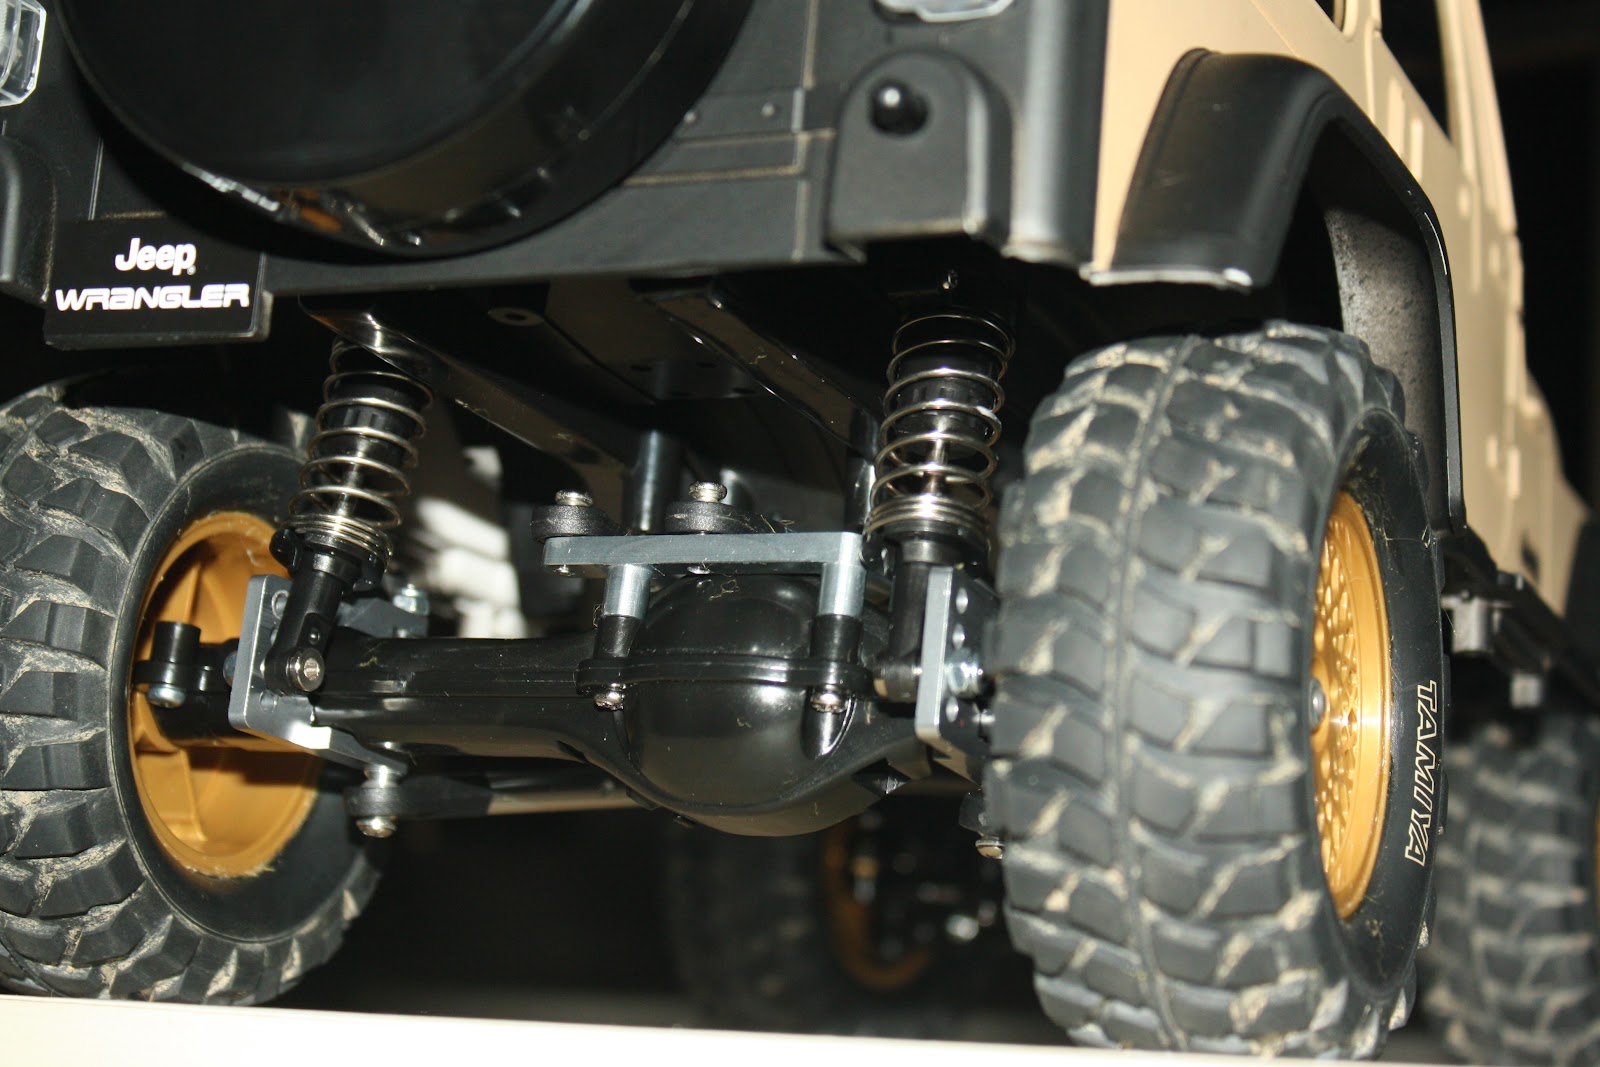 Tamiya CC-01 Wrangler - built thread Under+chassis+with+hopup+parts